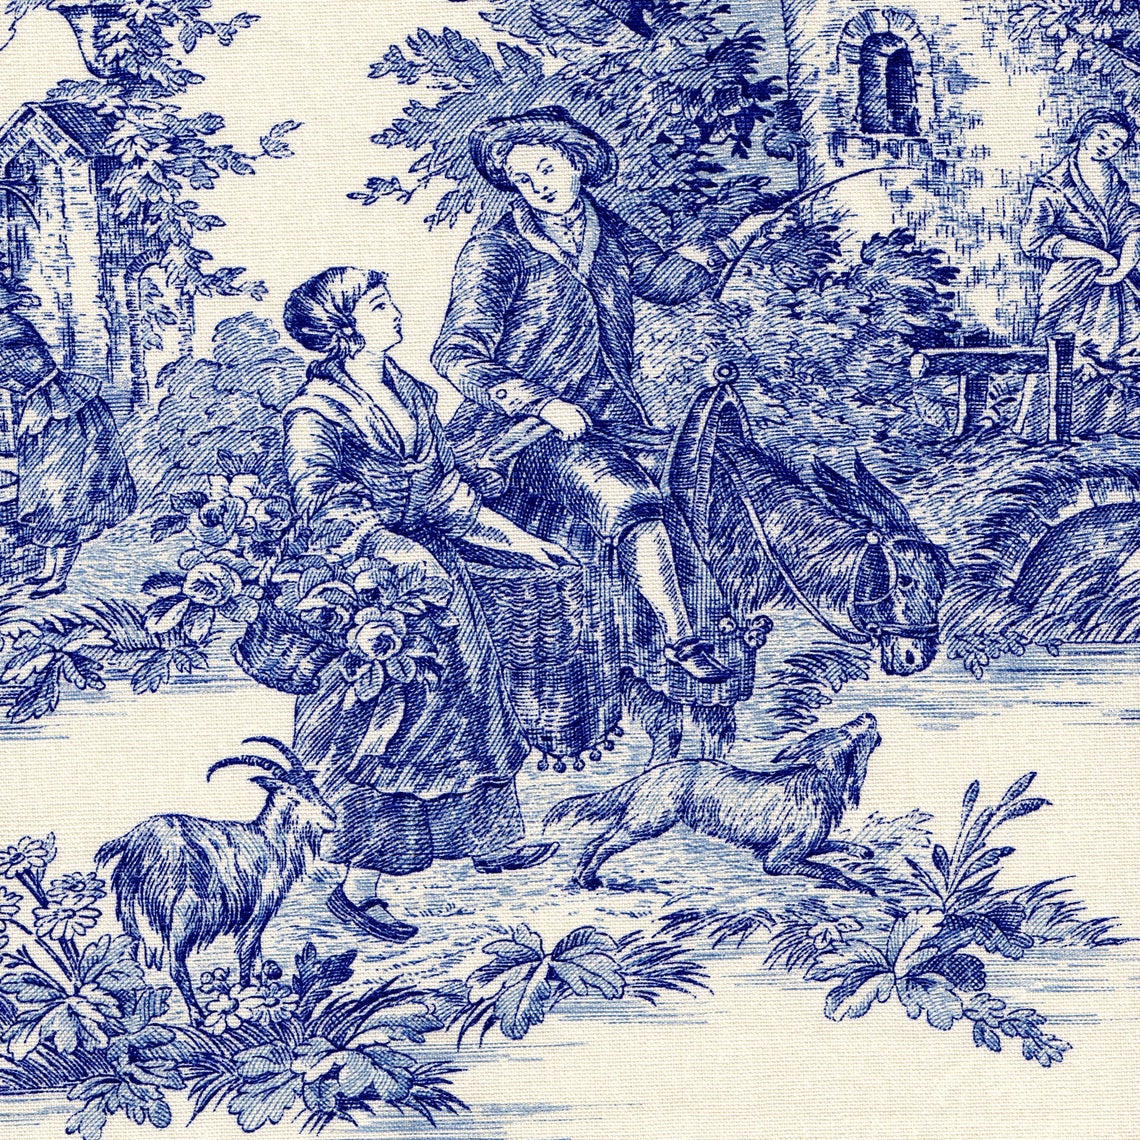 duvet cover in pastorale #2 blue on cream french country toile